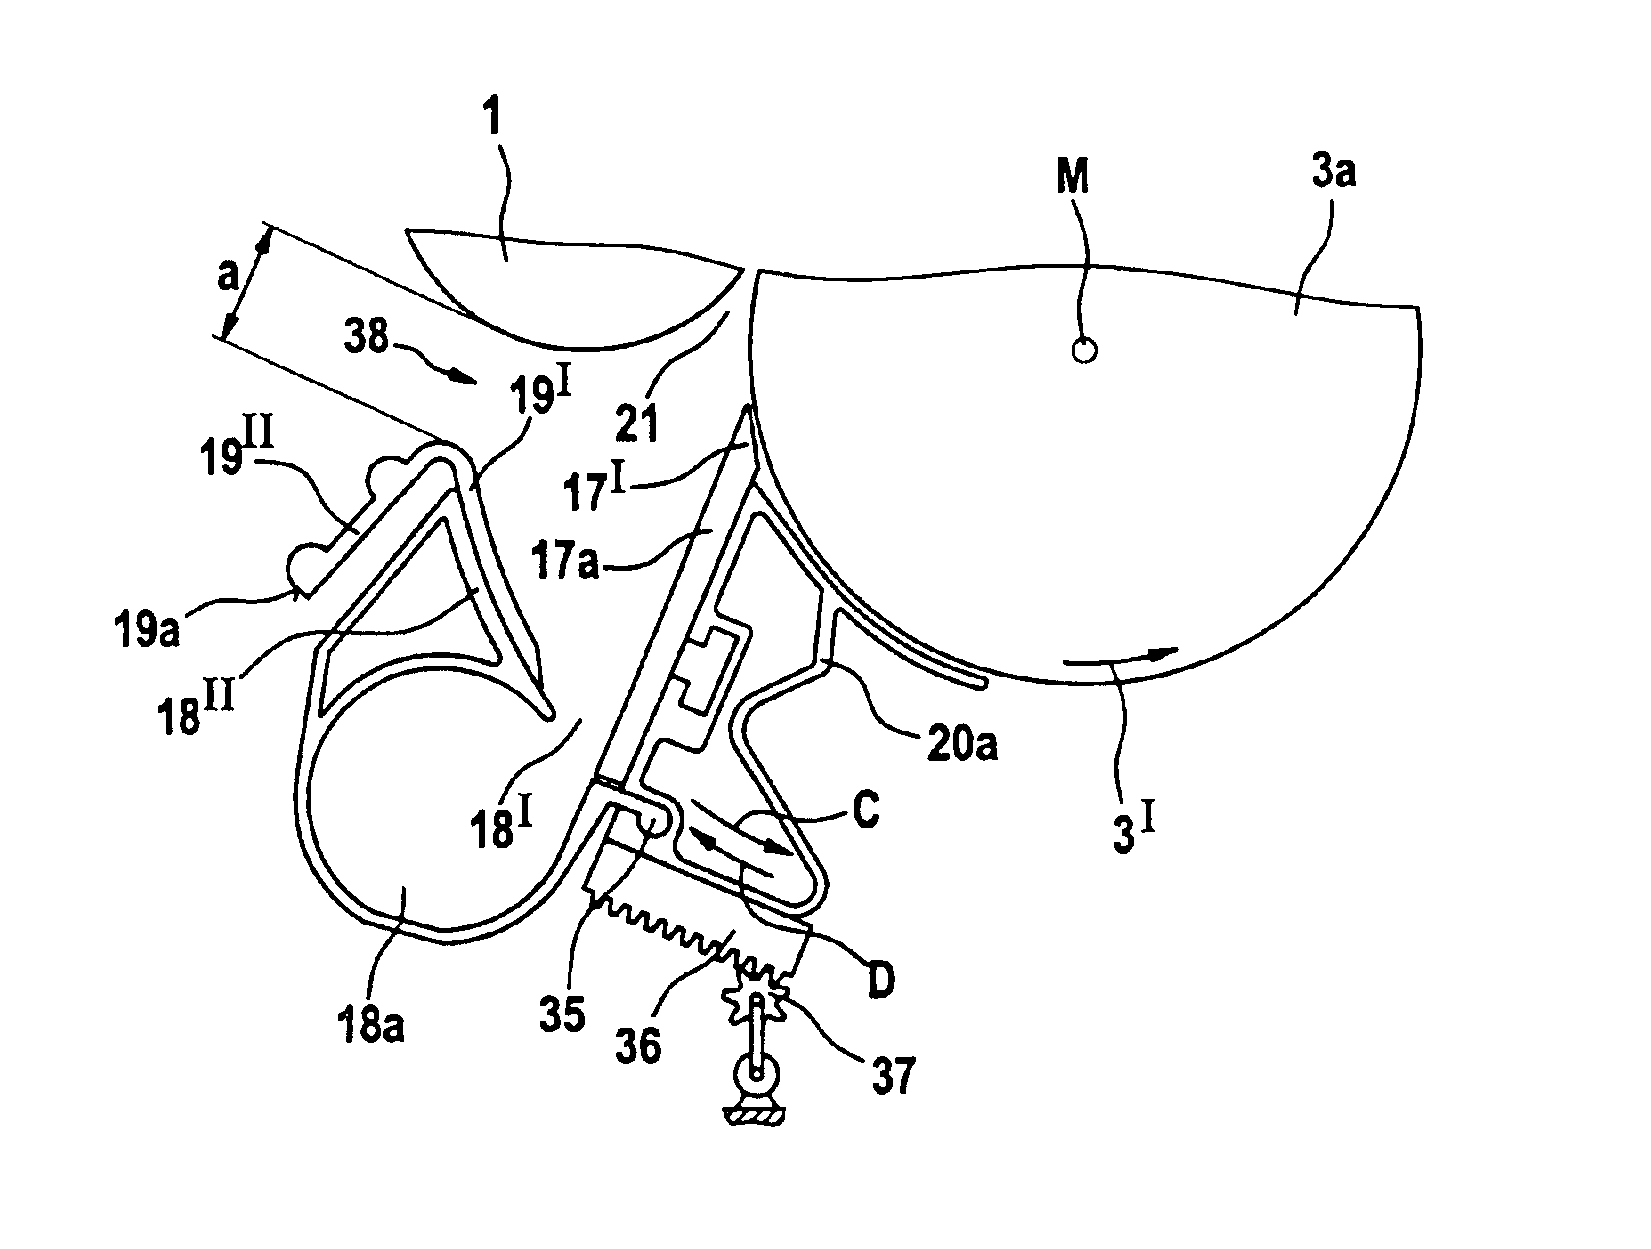 Separating device for a textile processing machine